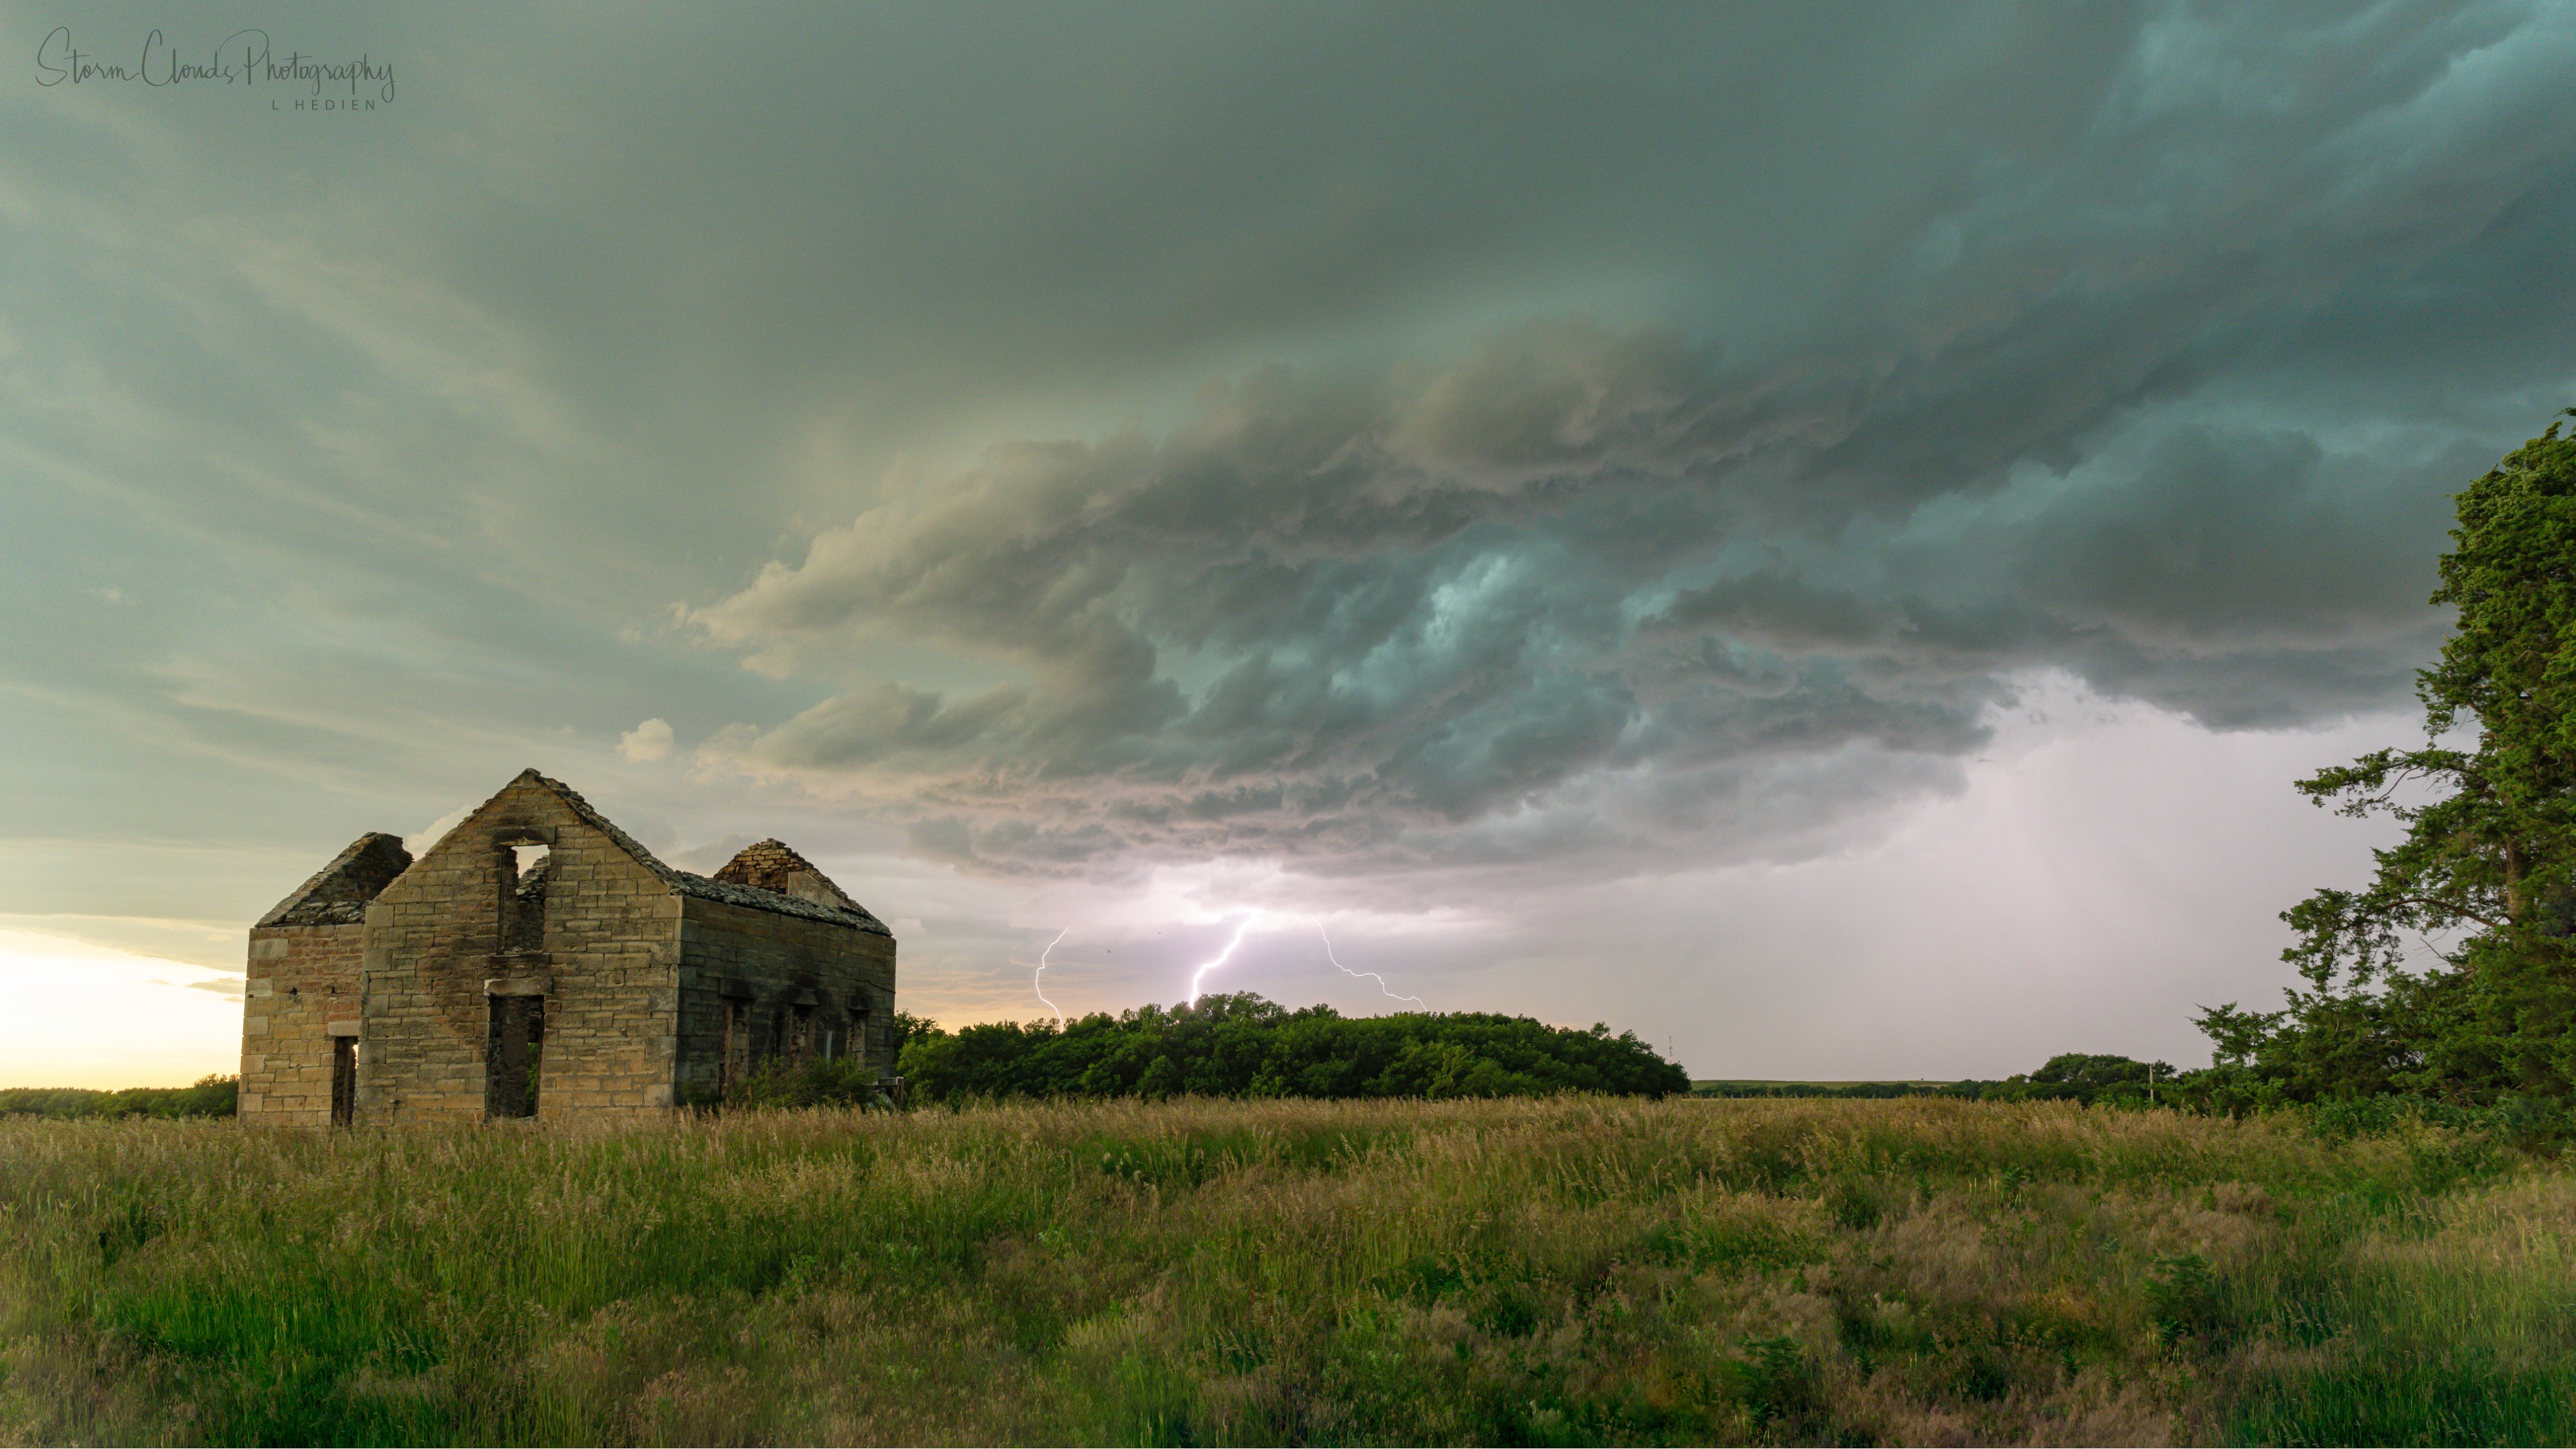 3rd Place Storm approaches an abandoned house on the Great Plains by Laura Hedien @lhedien